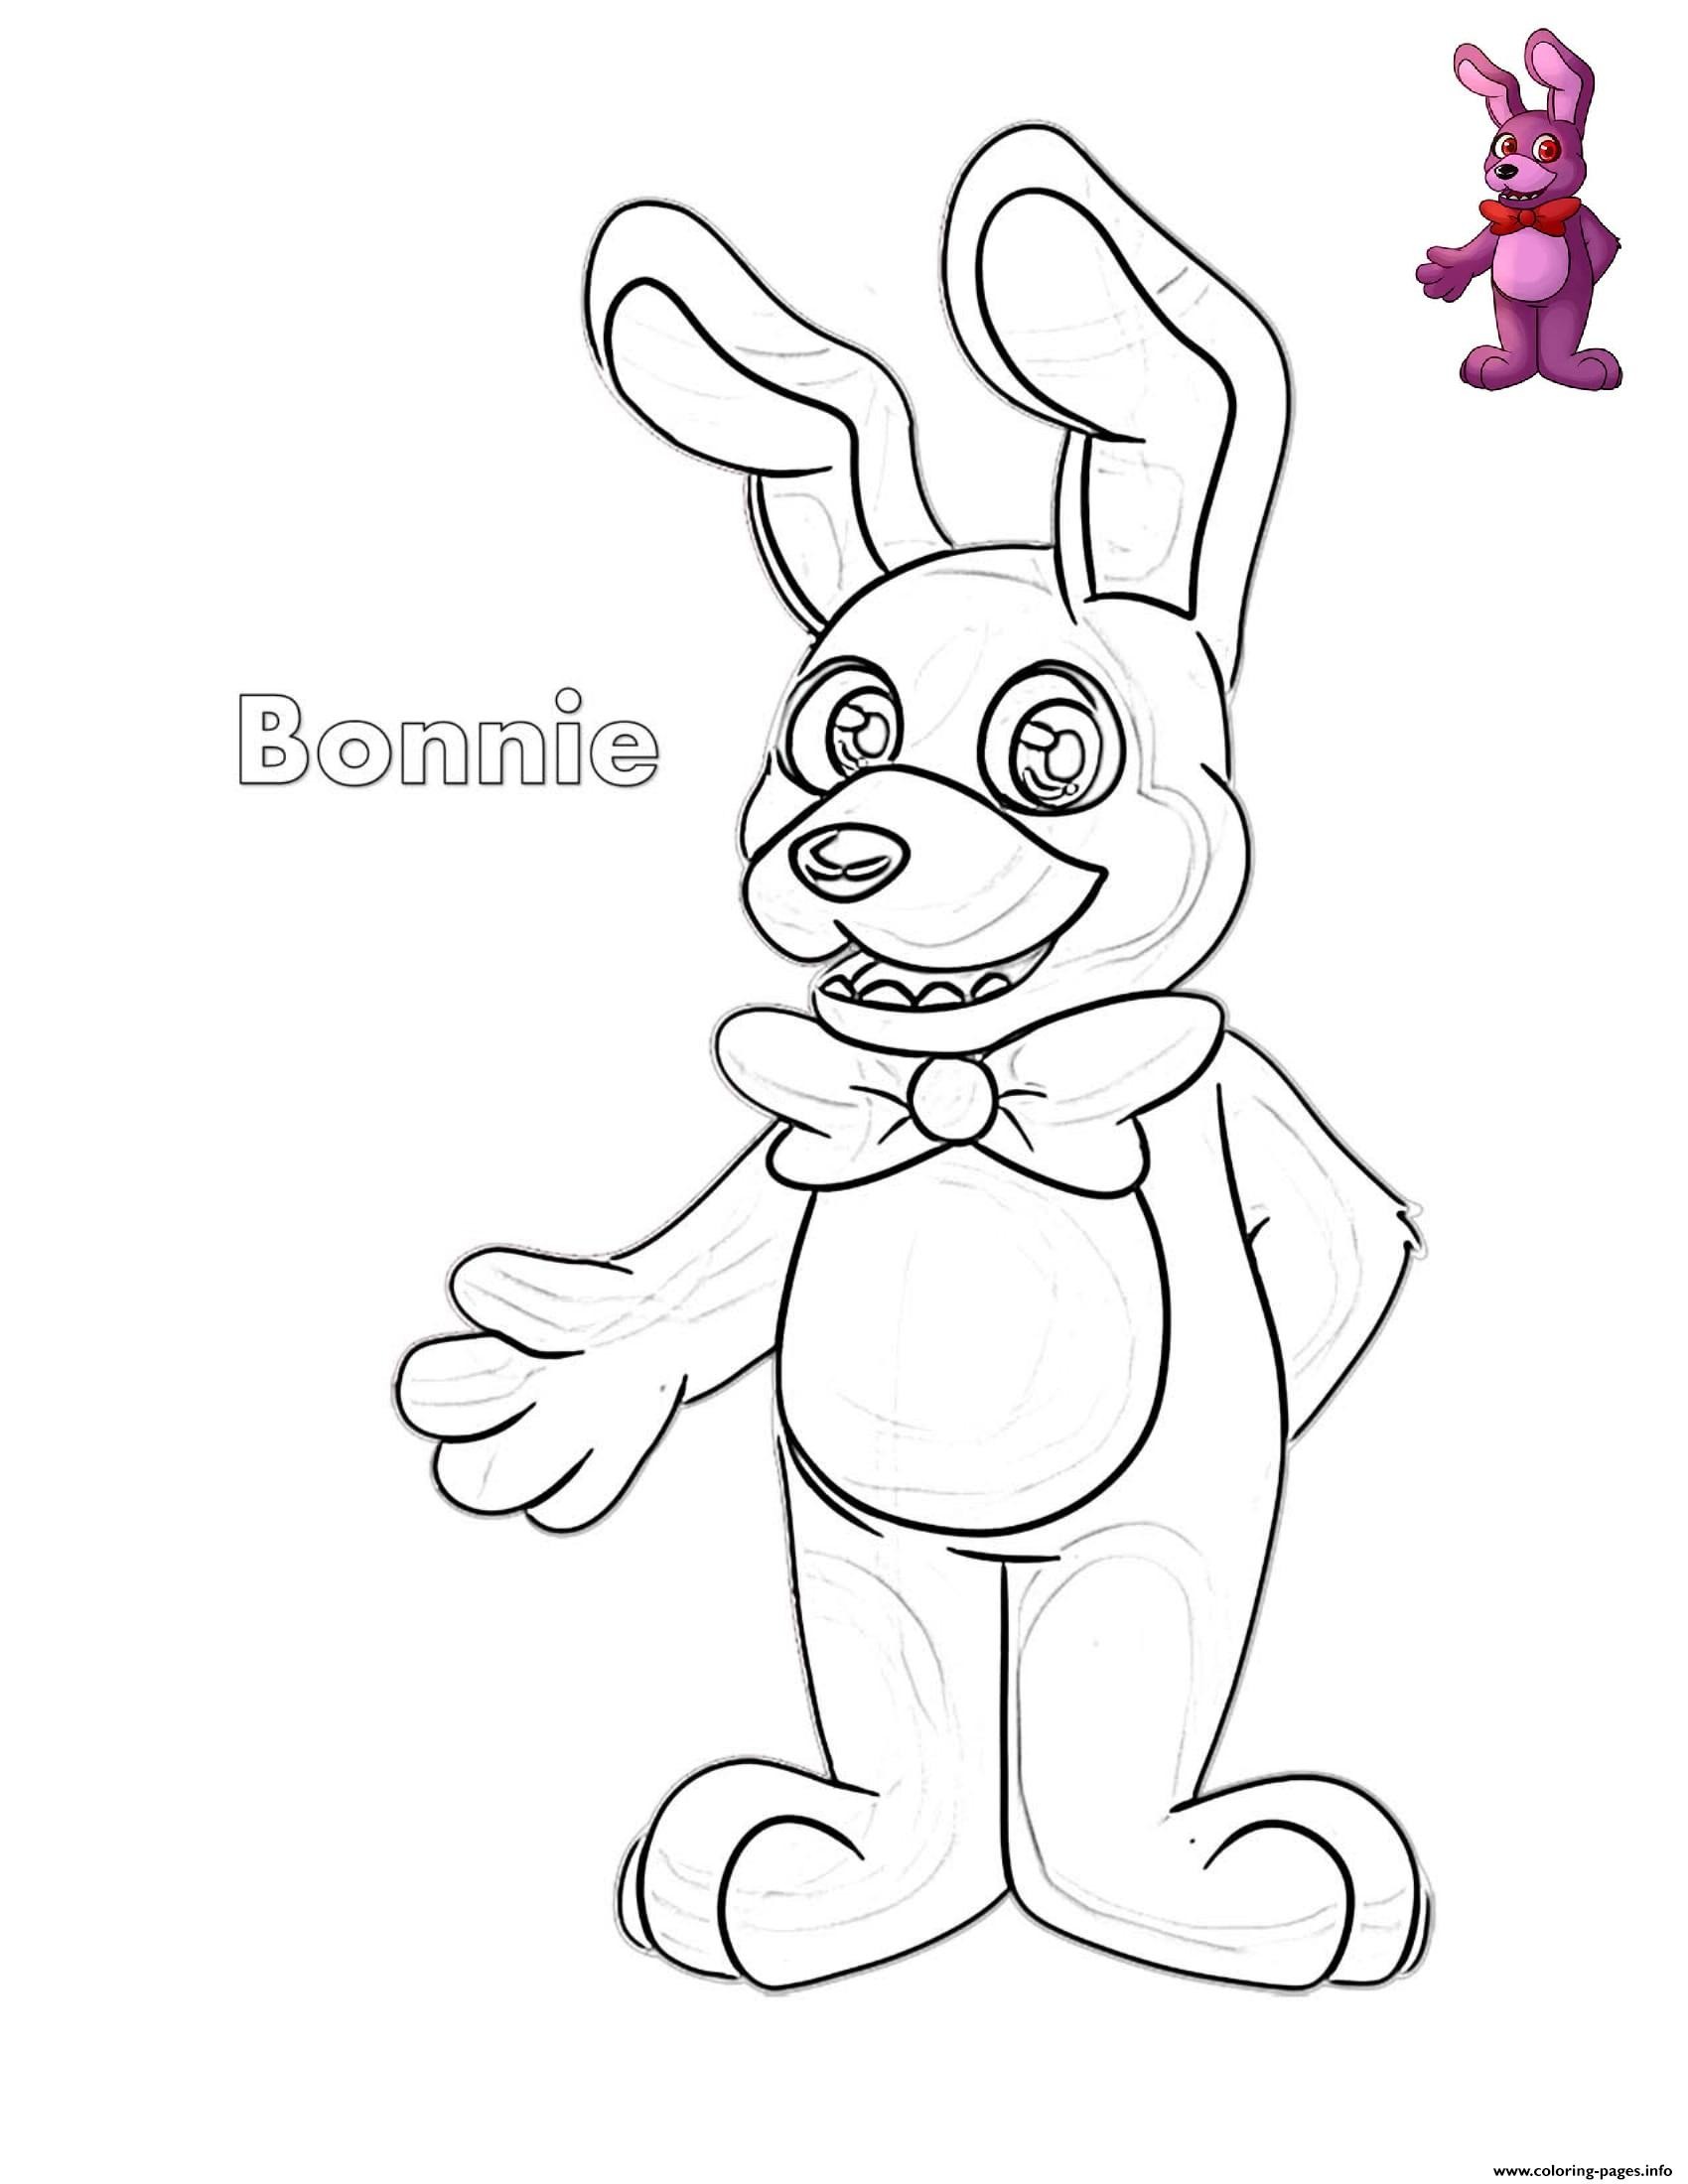 Fnaf Coloring Pages Bonnie at GetColoringscom Free